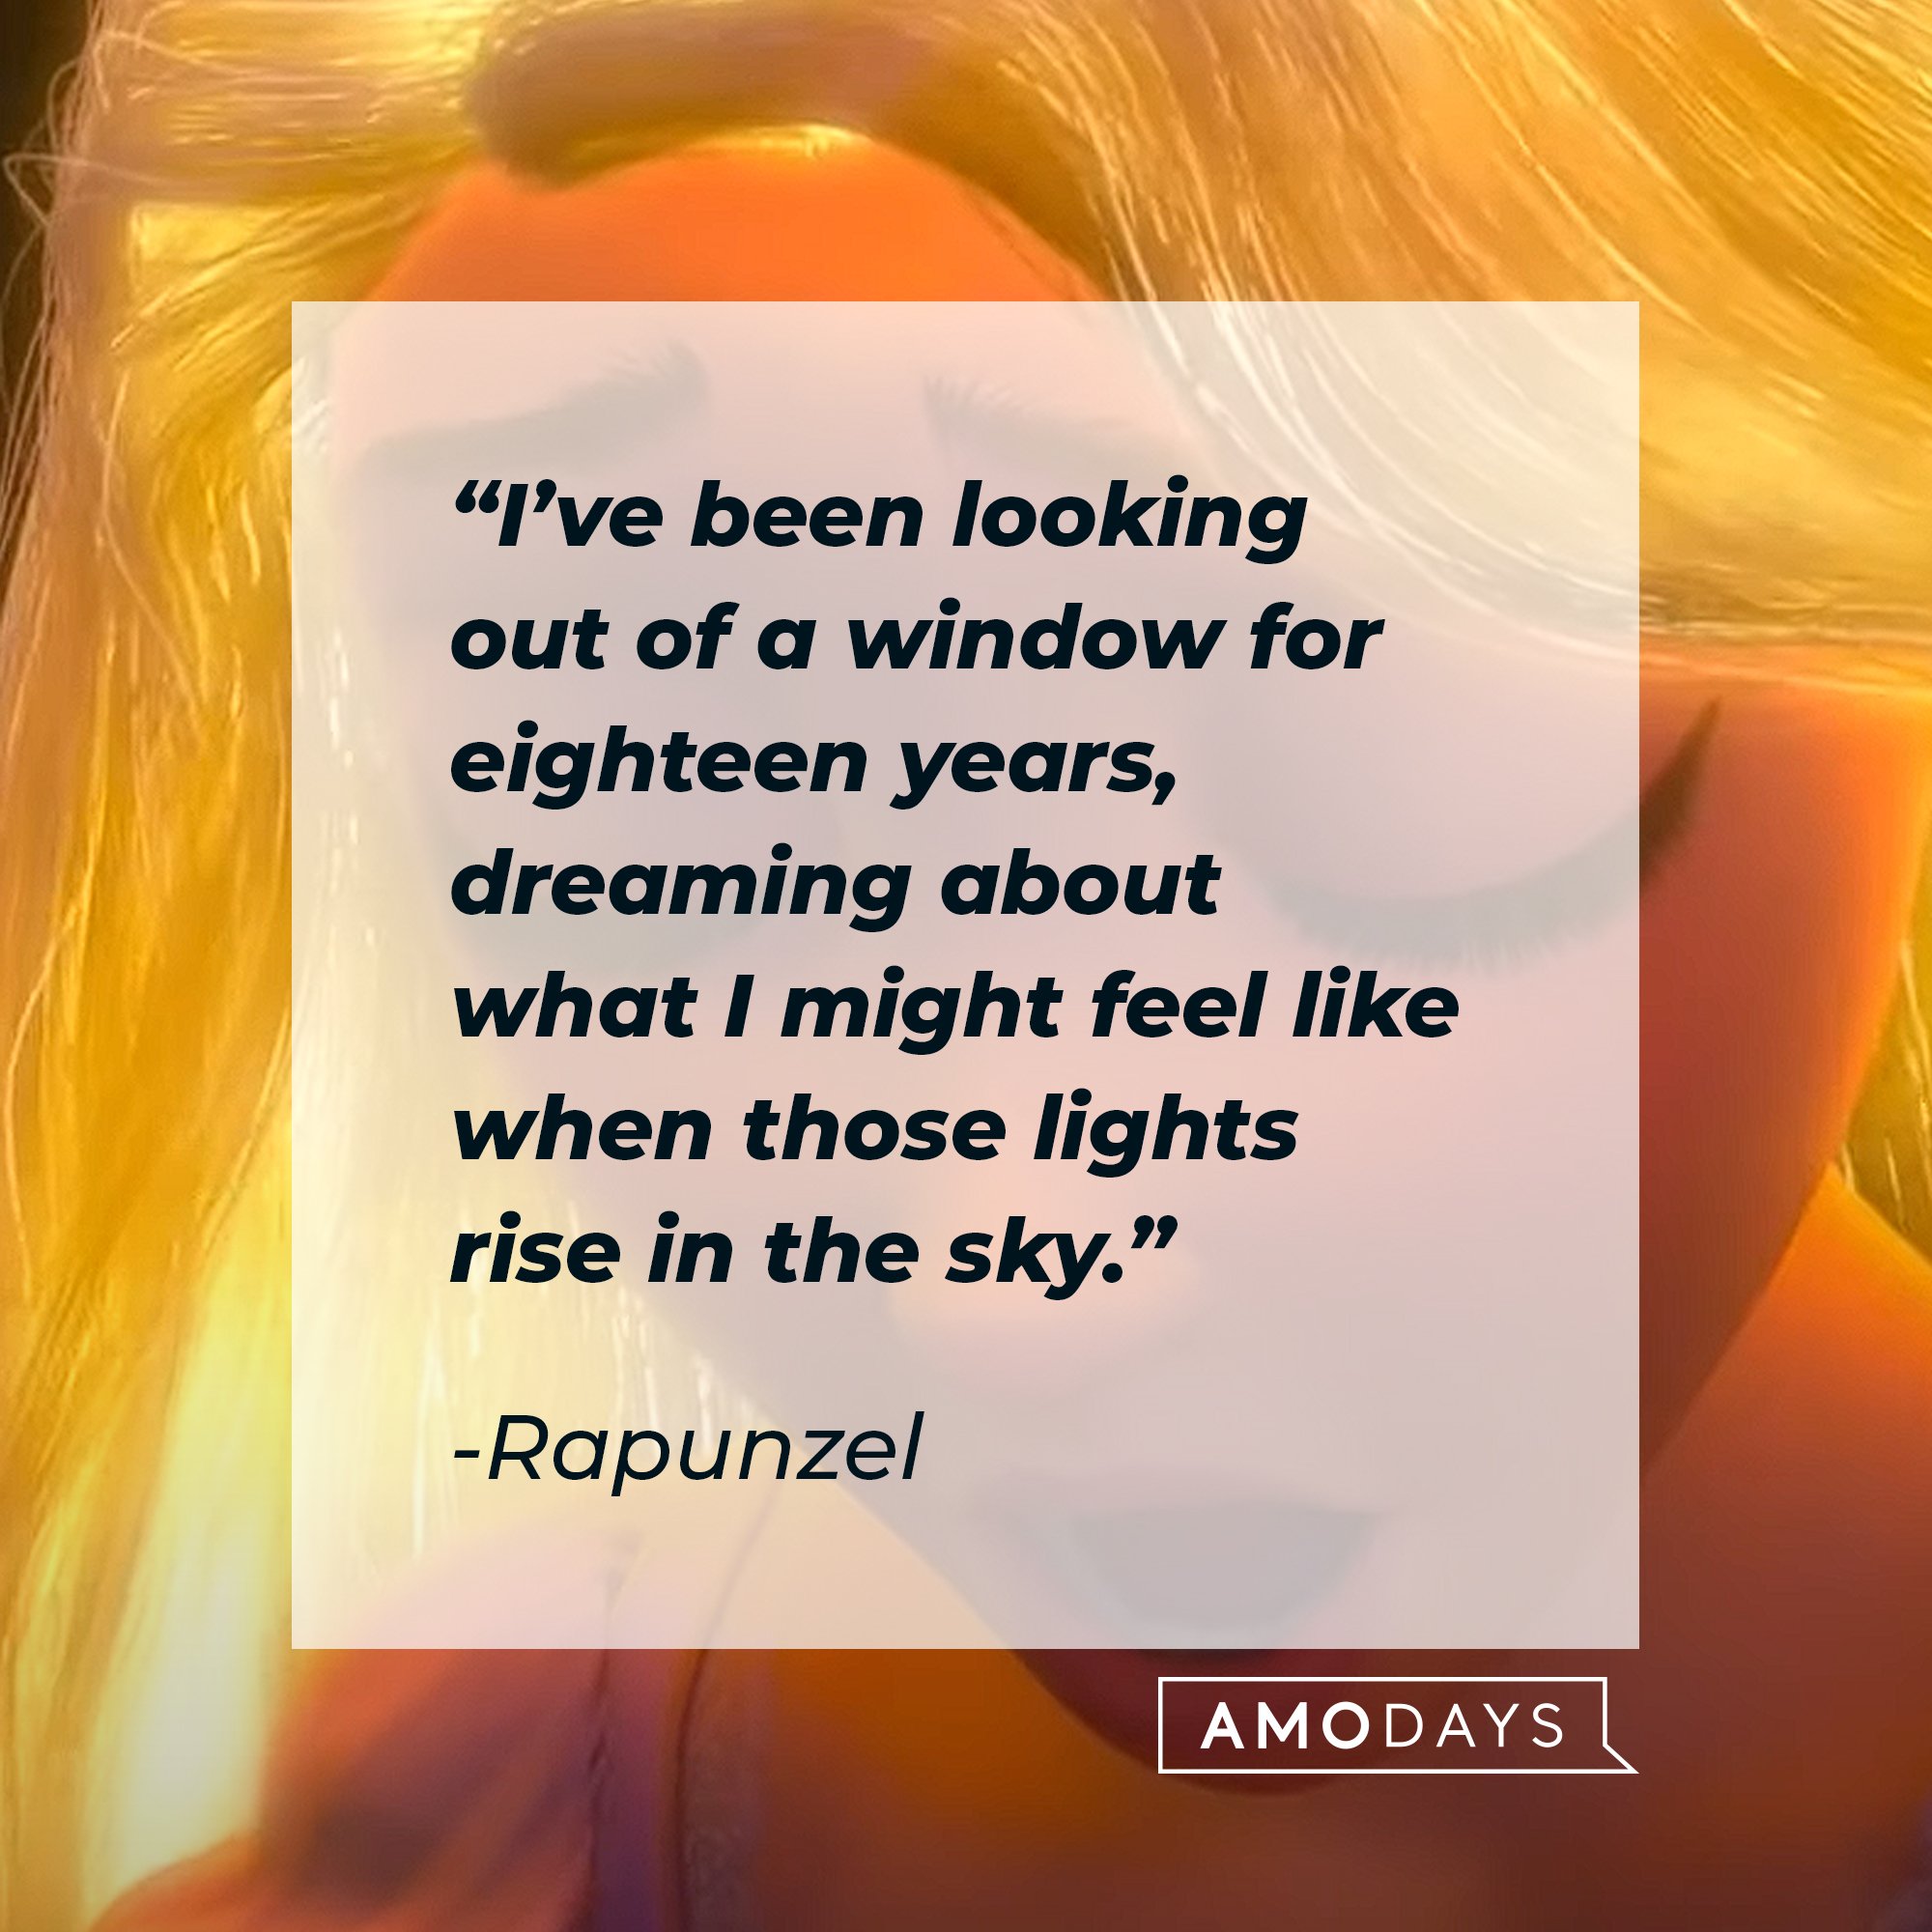 Rapunzel's quote: "I've been looking out of a window for eighteen years, dreaming about what I might feel like when those lights rise in the sky." | Image: AmoDays